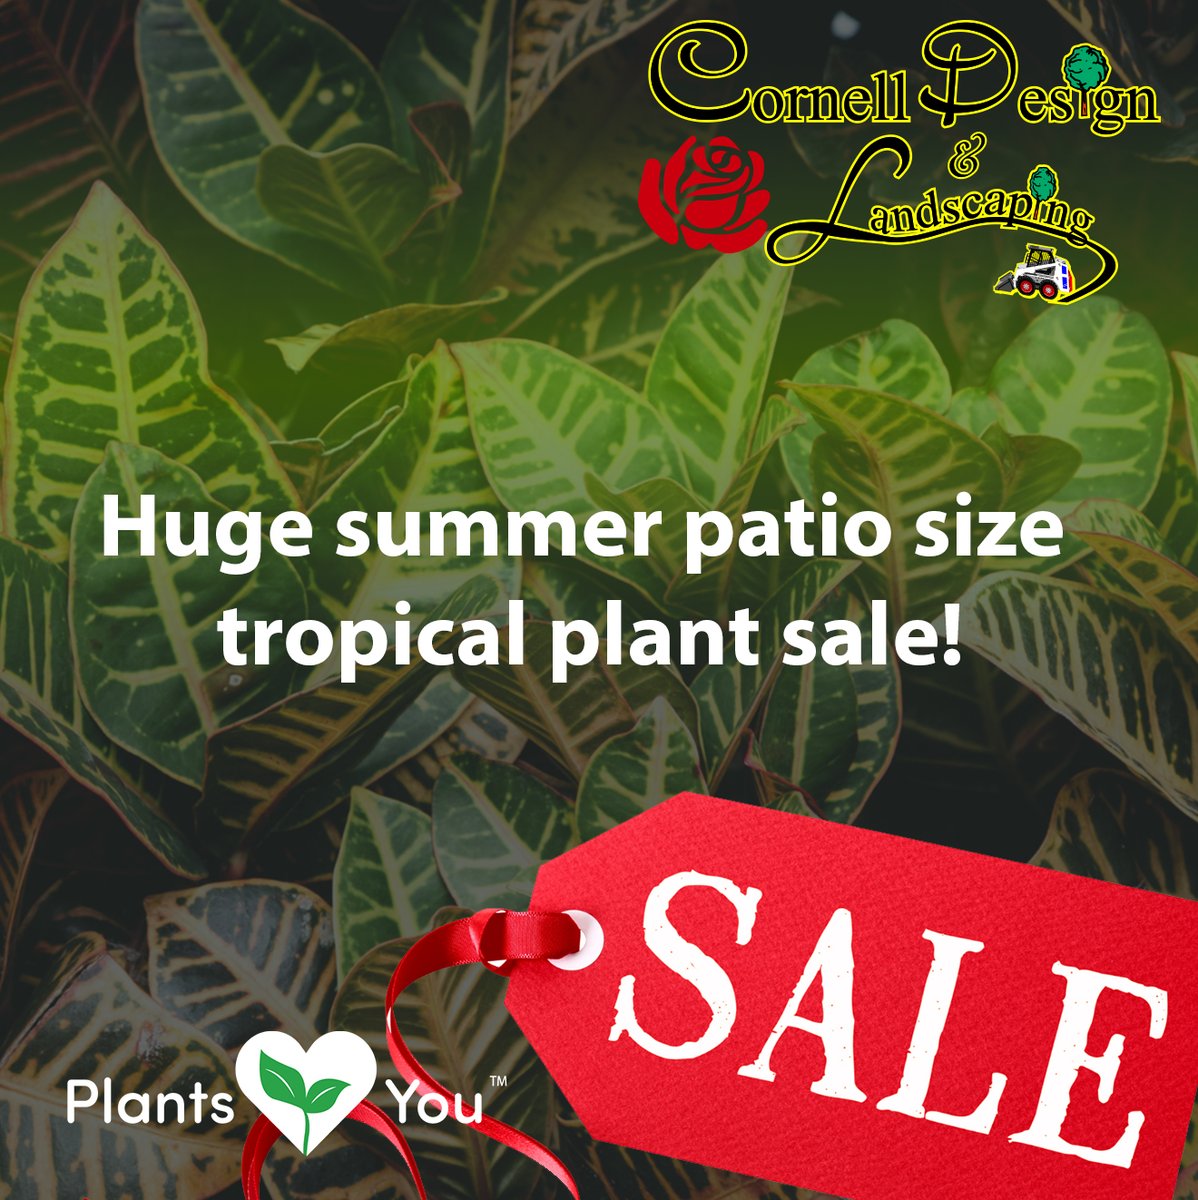 🌴🌺🌿 Don't miss out on our summer patio size tropical SALE! Get 25% off select tropical plants now! Hurry in for the best selection before they're gone! 🌴🌺🌿 

#tropicalplants #summertime #sale #moosejaw